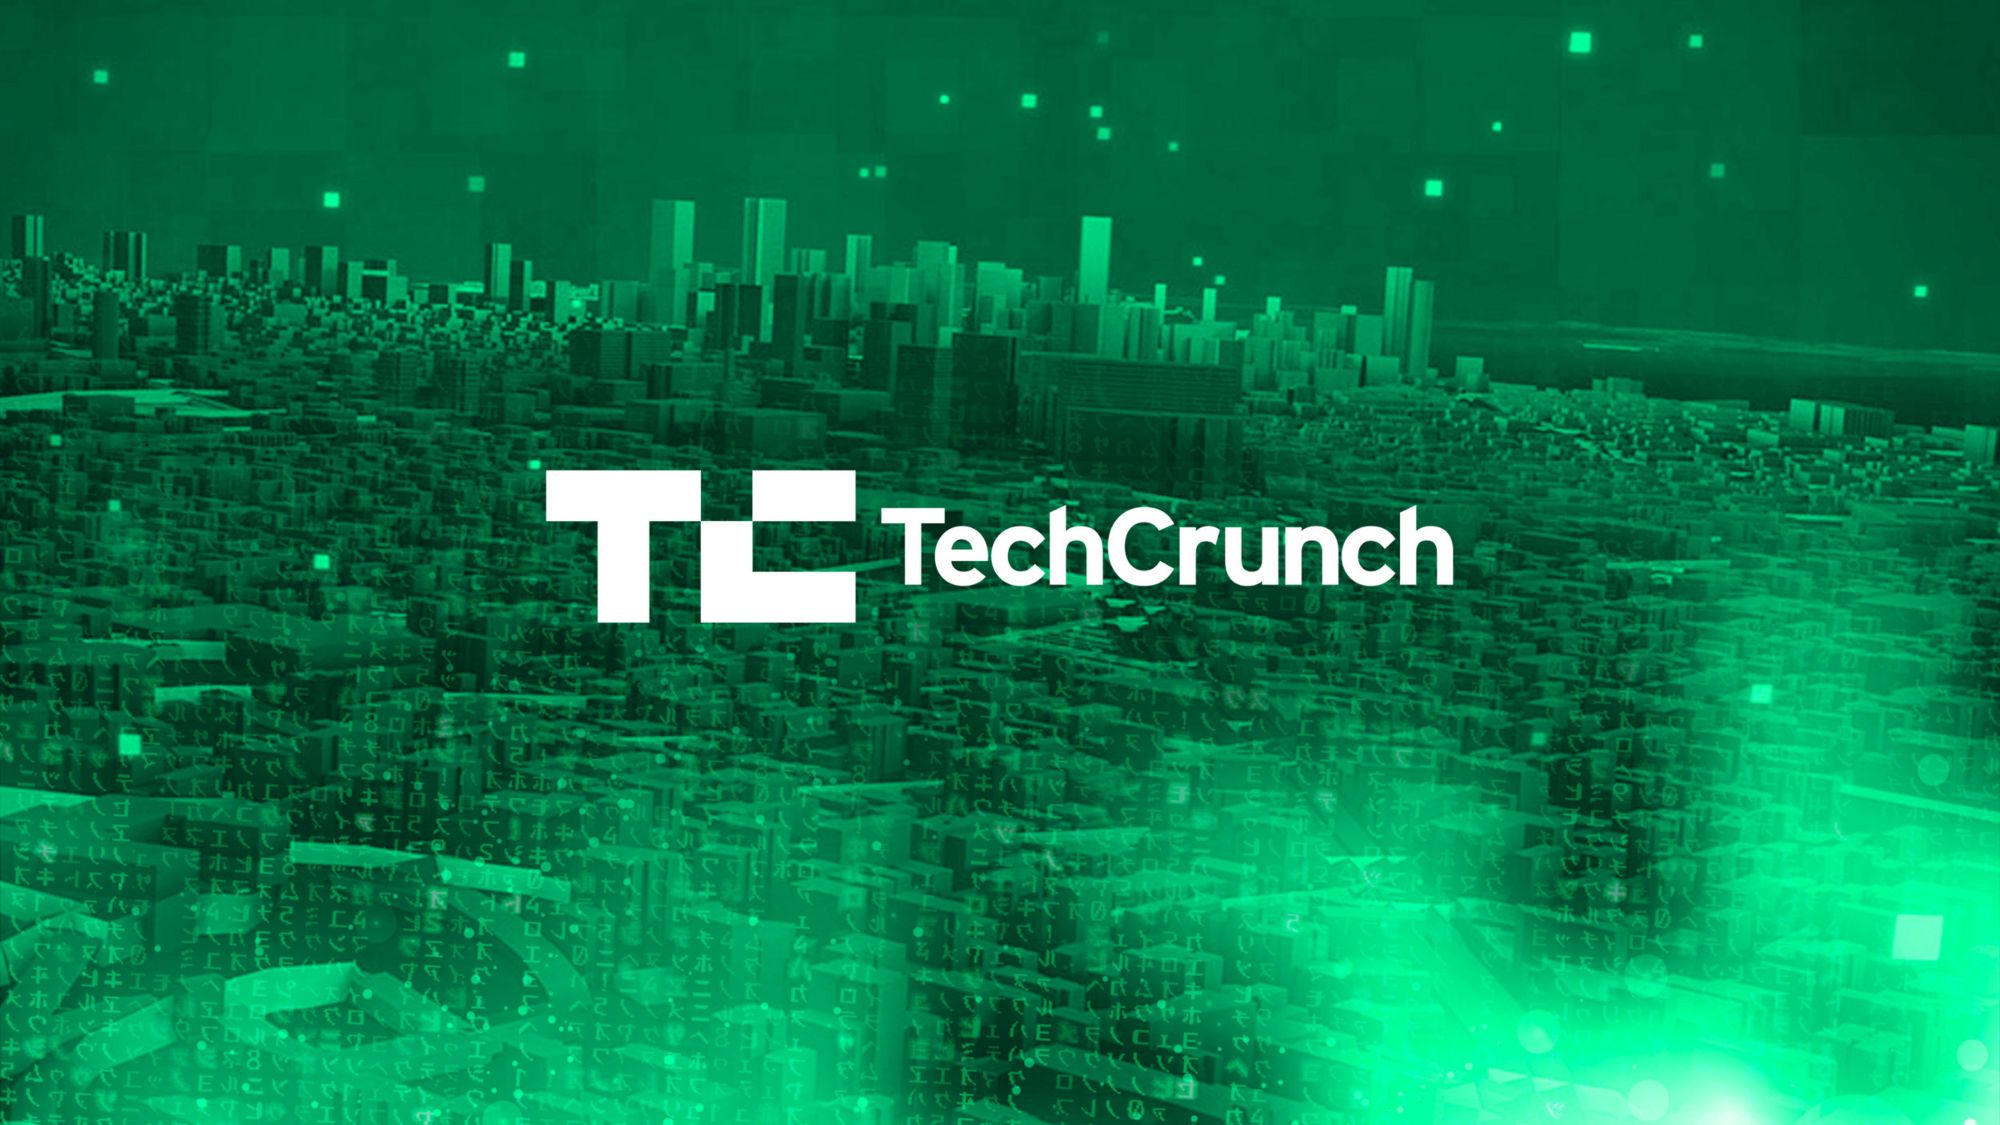 19-captivating-facts-about-techcrunch